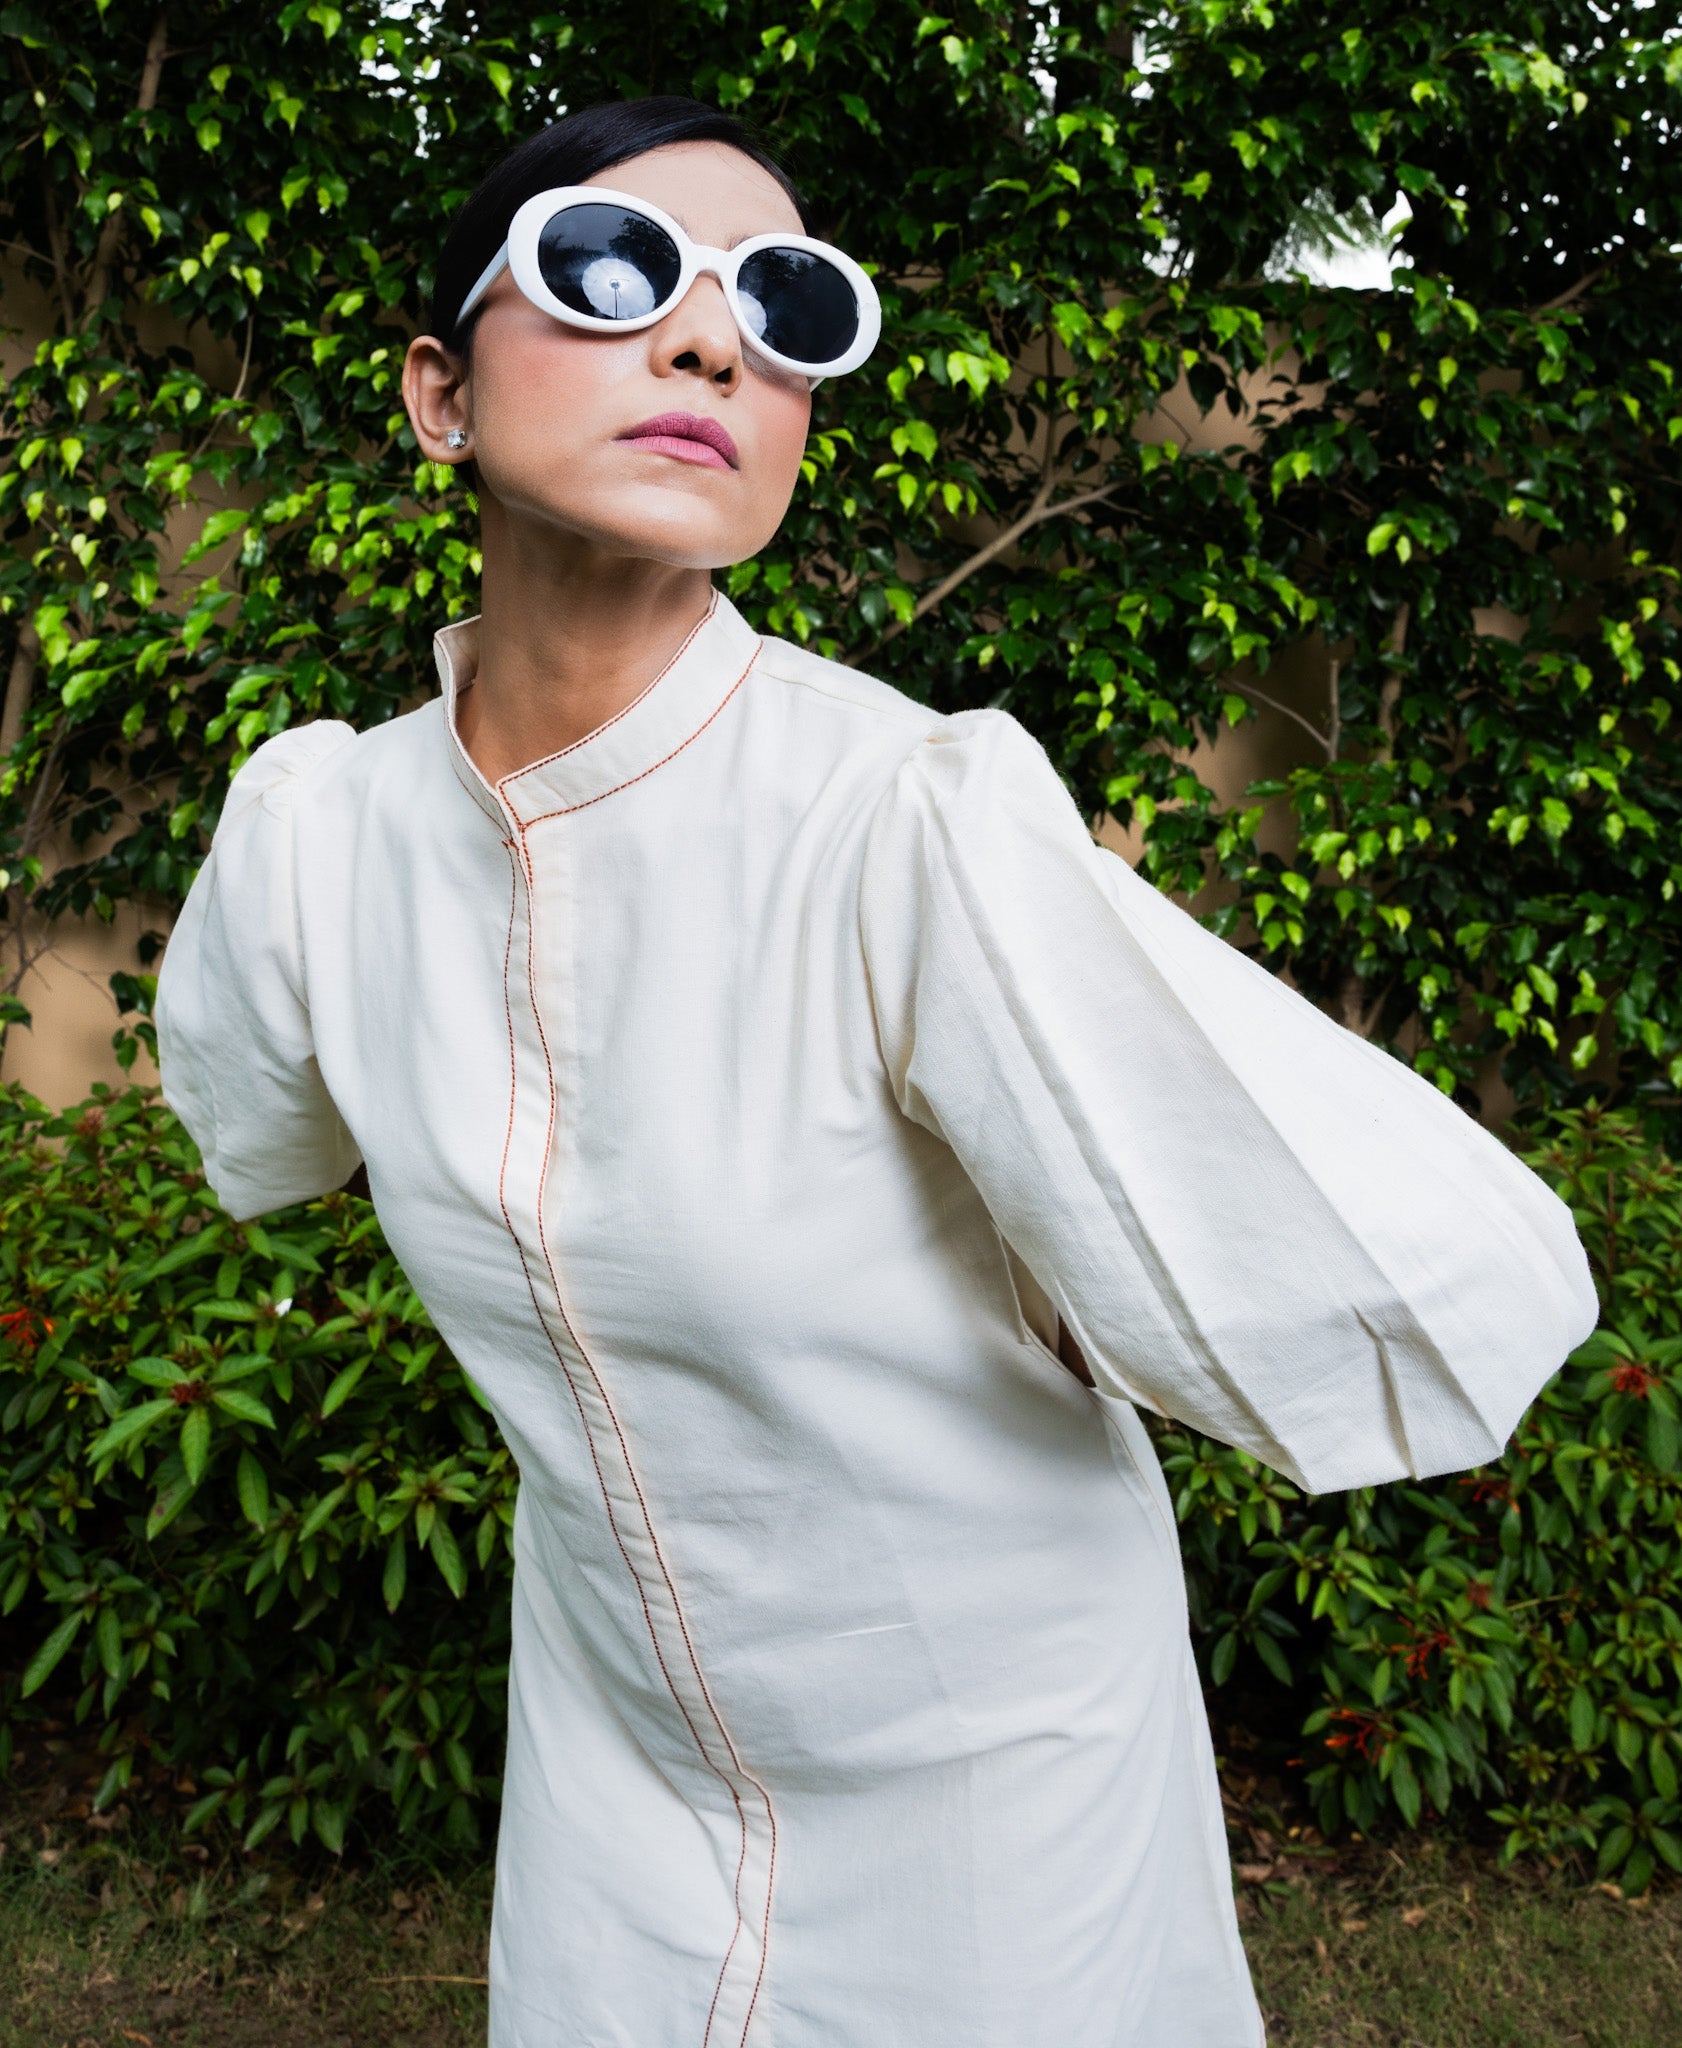 Contract Stiched Detailed Khadi Cotton Dress - Mandarin Collar + Puffed Sleeves - Spin Wheel